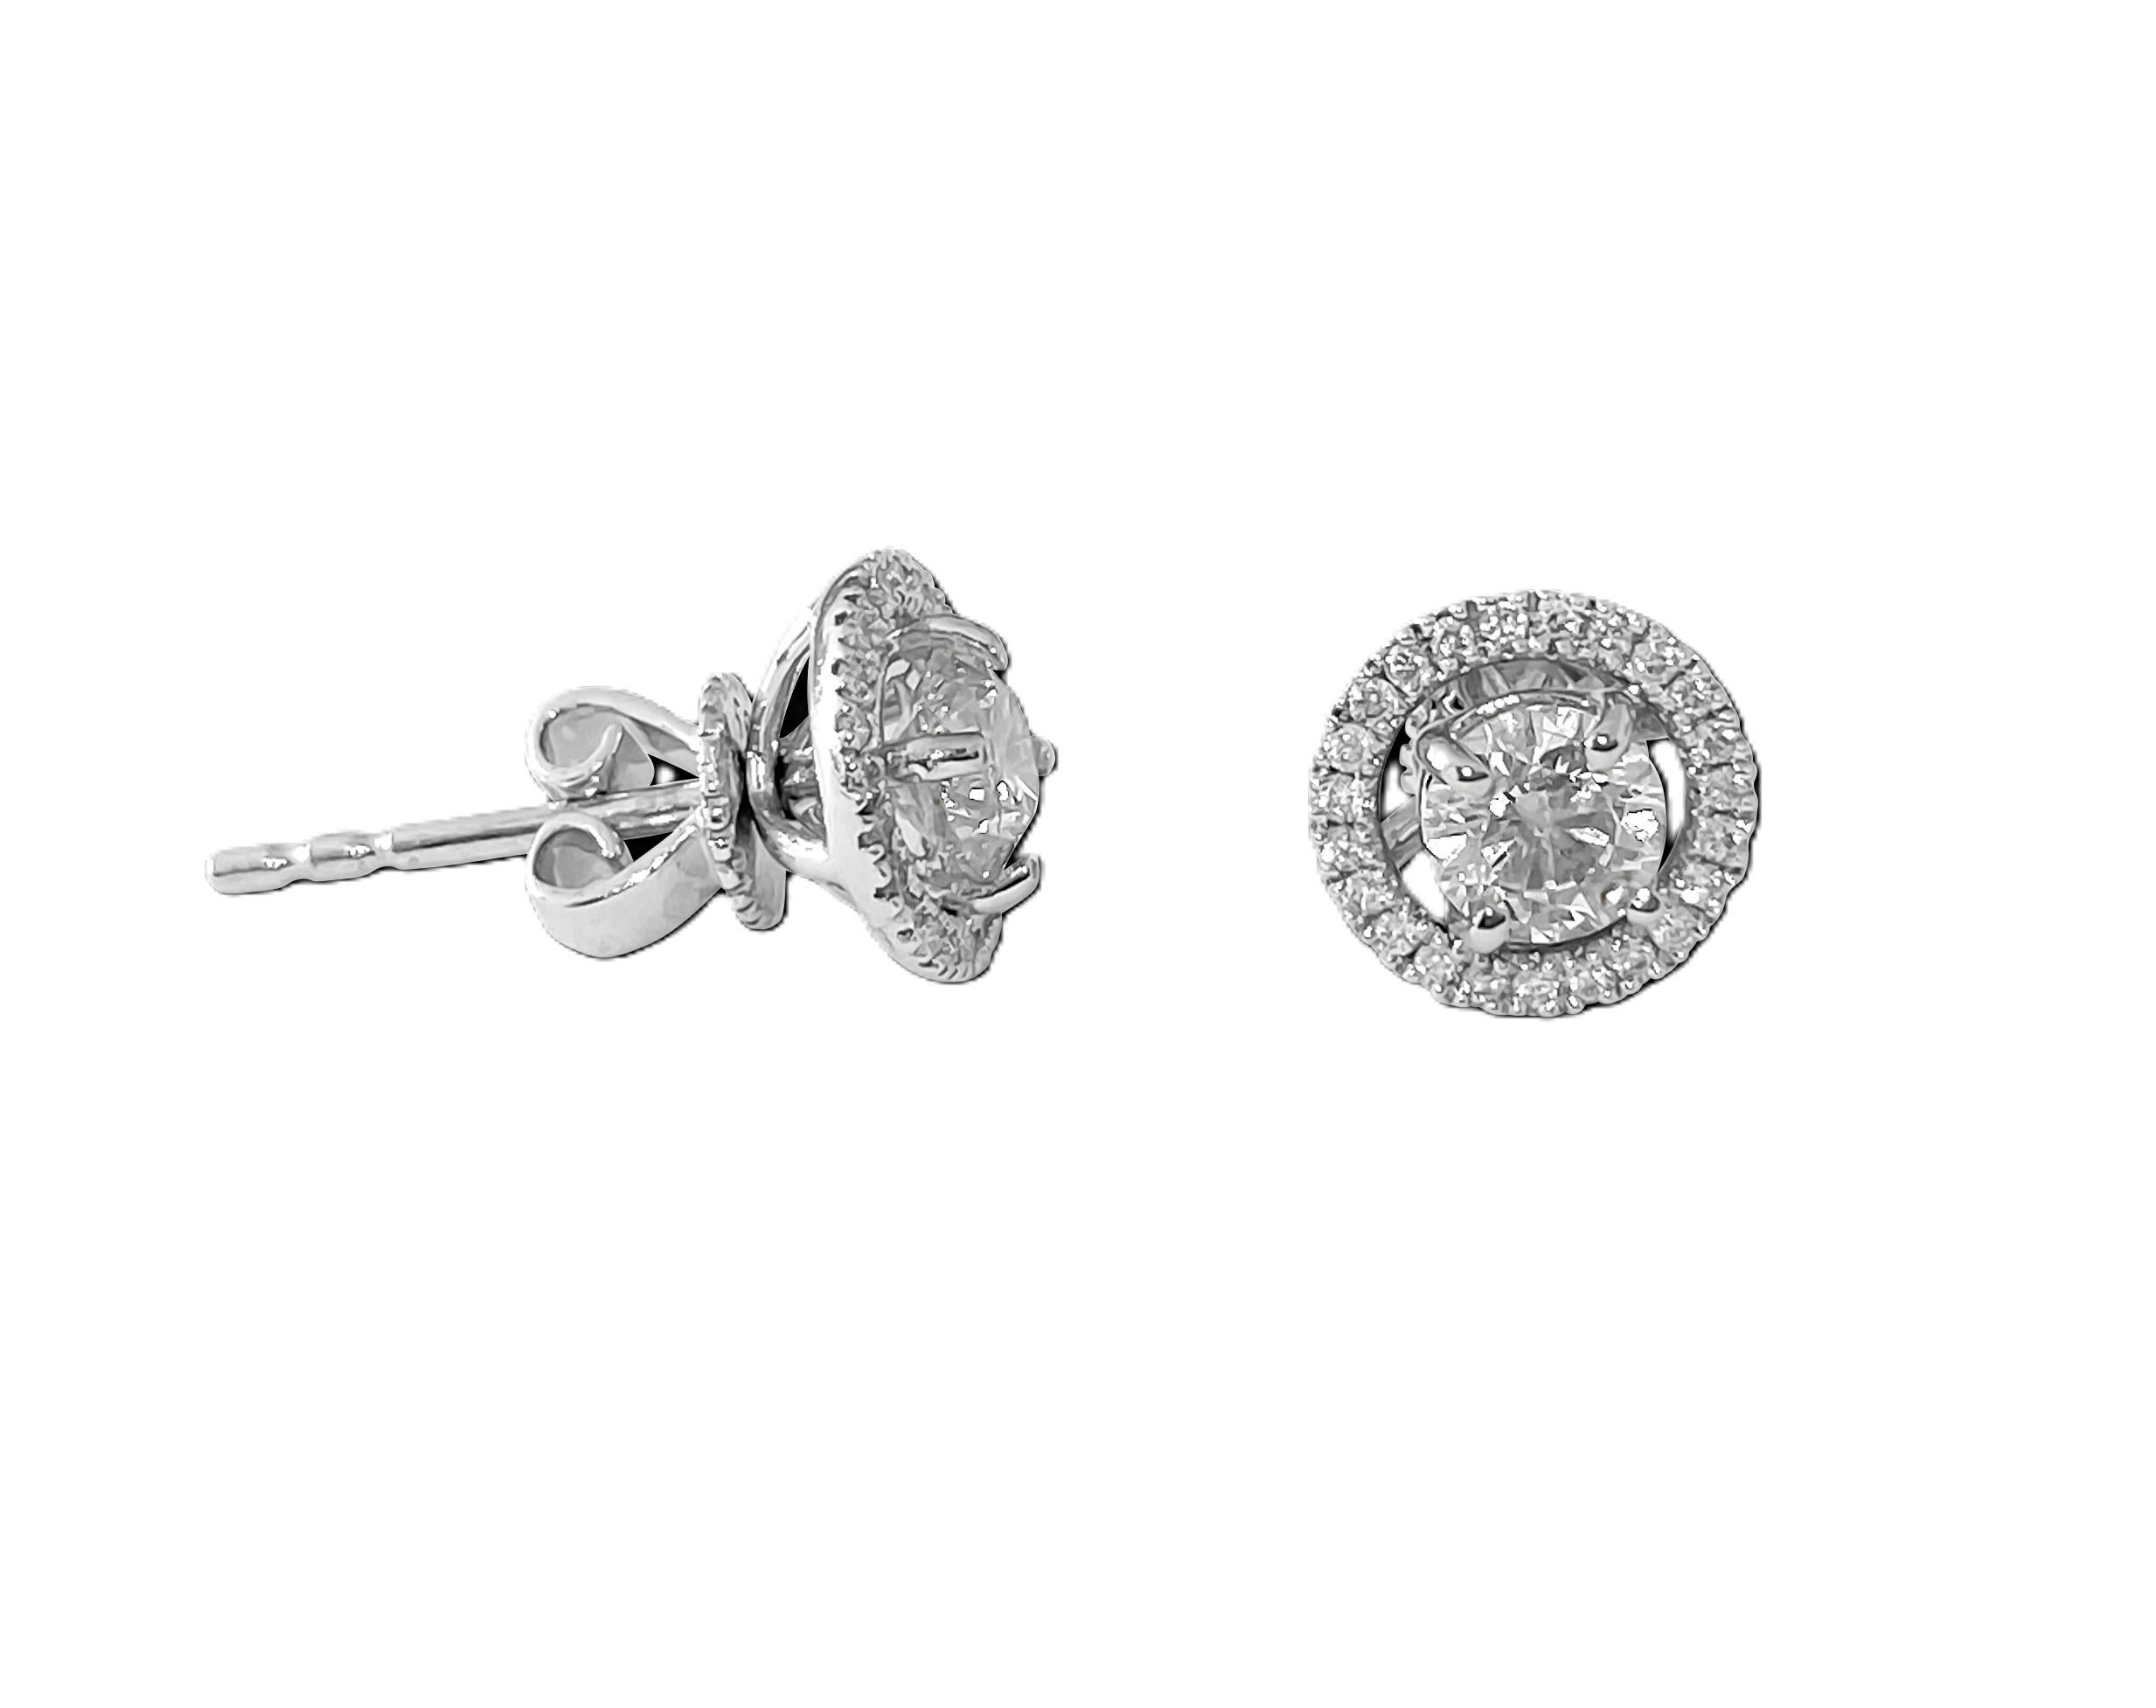 Transform your stud earrings into something entirely new when you slip earring jackets onto the posts. The jackets peek out from behind your earlobe, giving you a whole new look instantly. Butterfly pushback earrings. Perfect diamond and gold